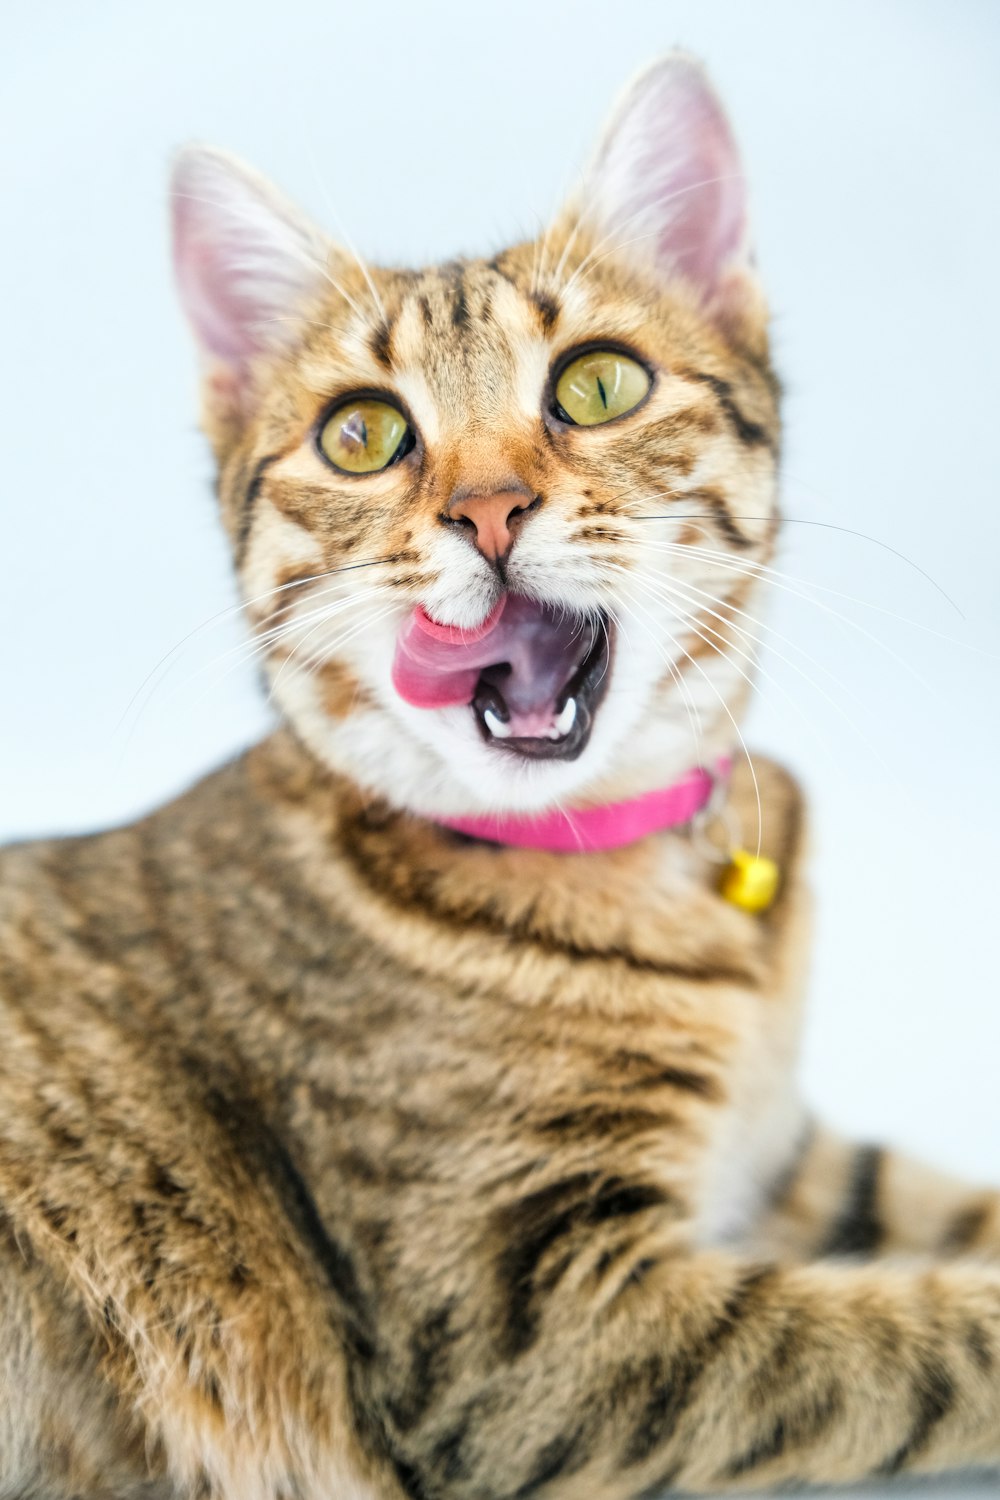 a cat with its mouth open and tongue out